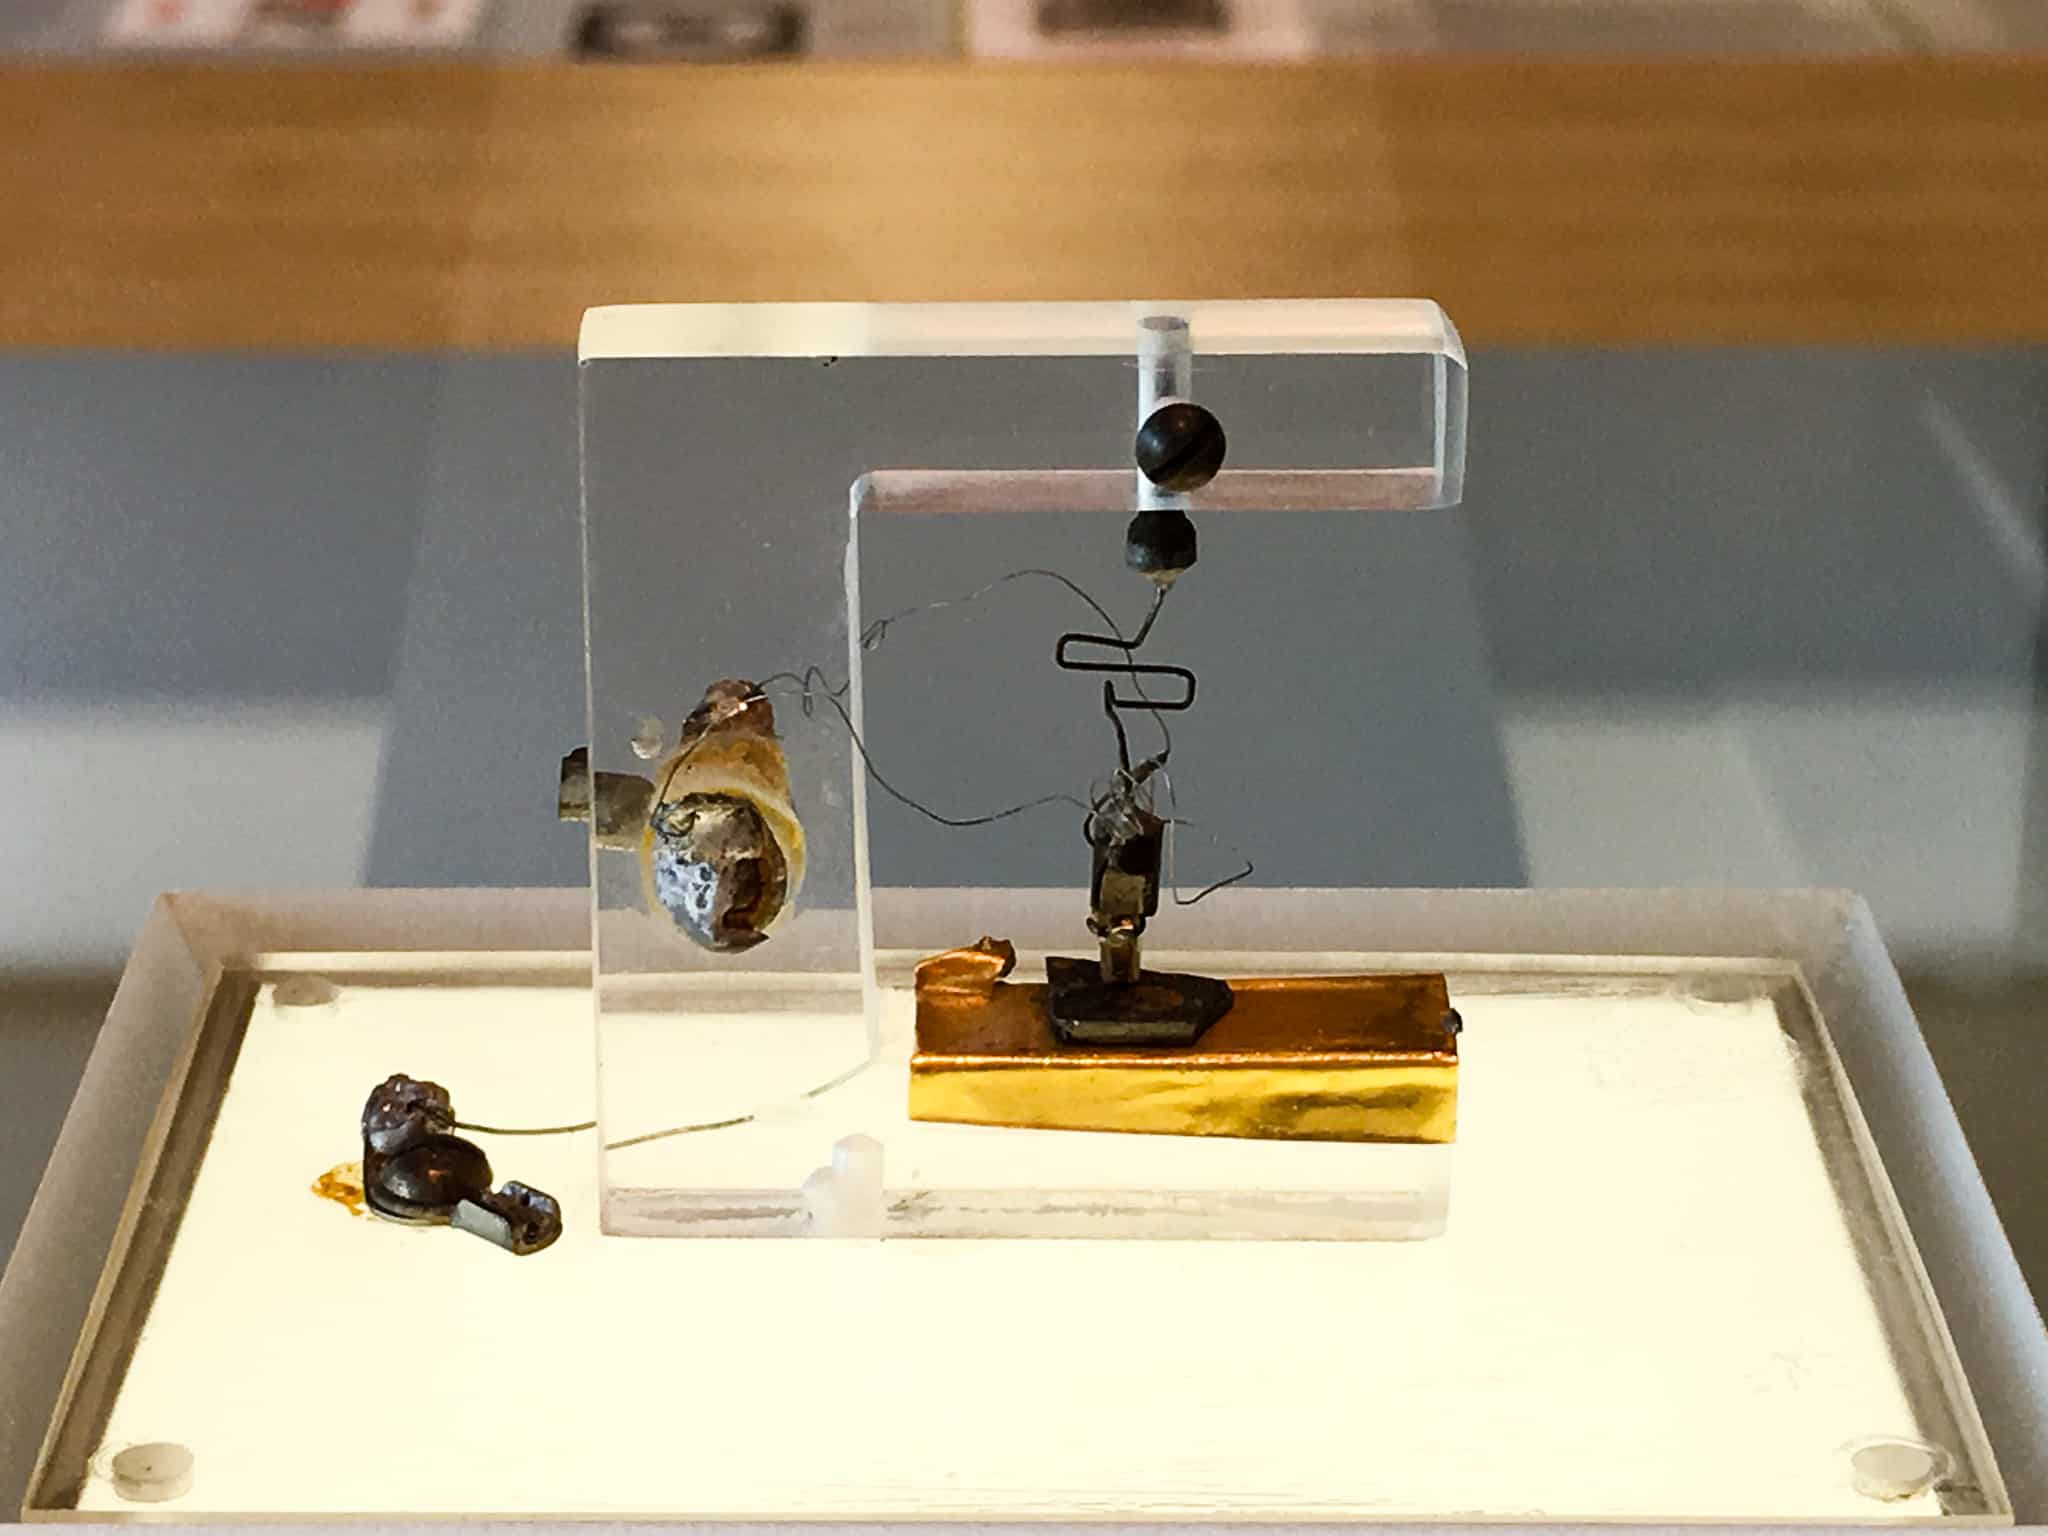 The first transistor on display.